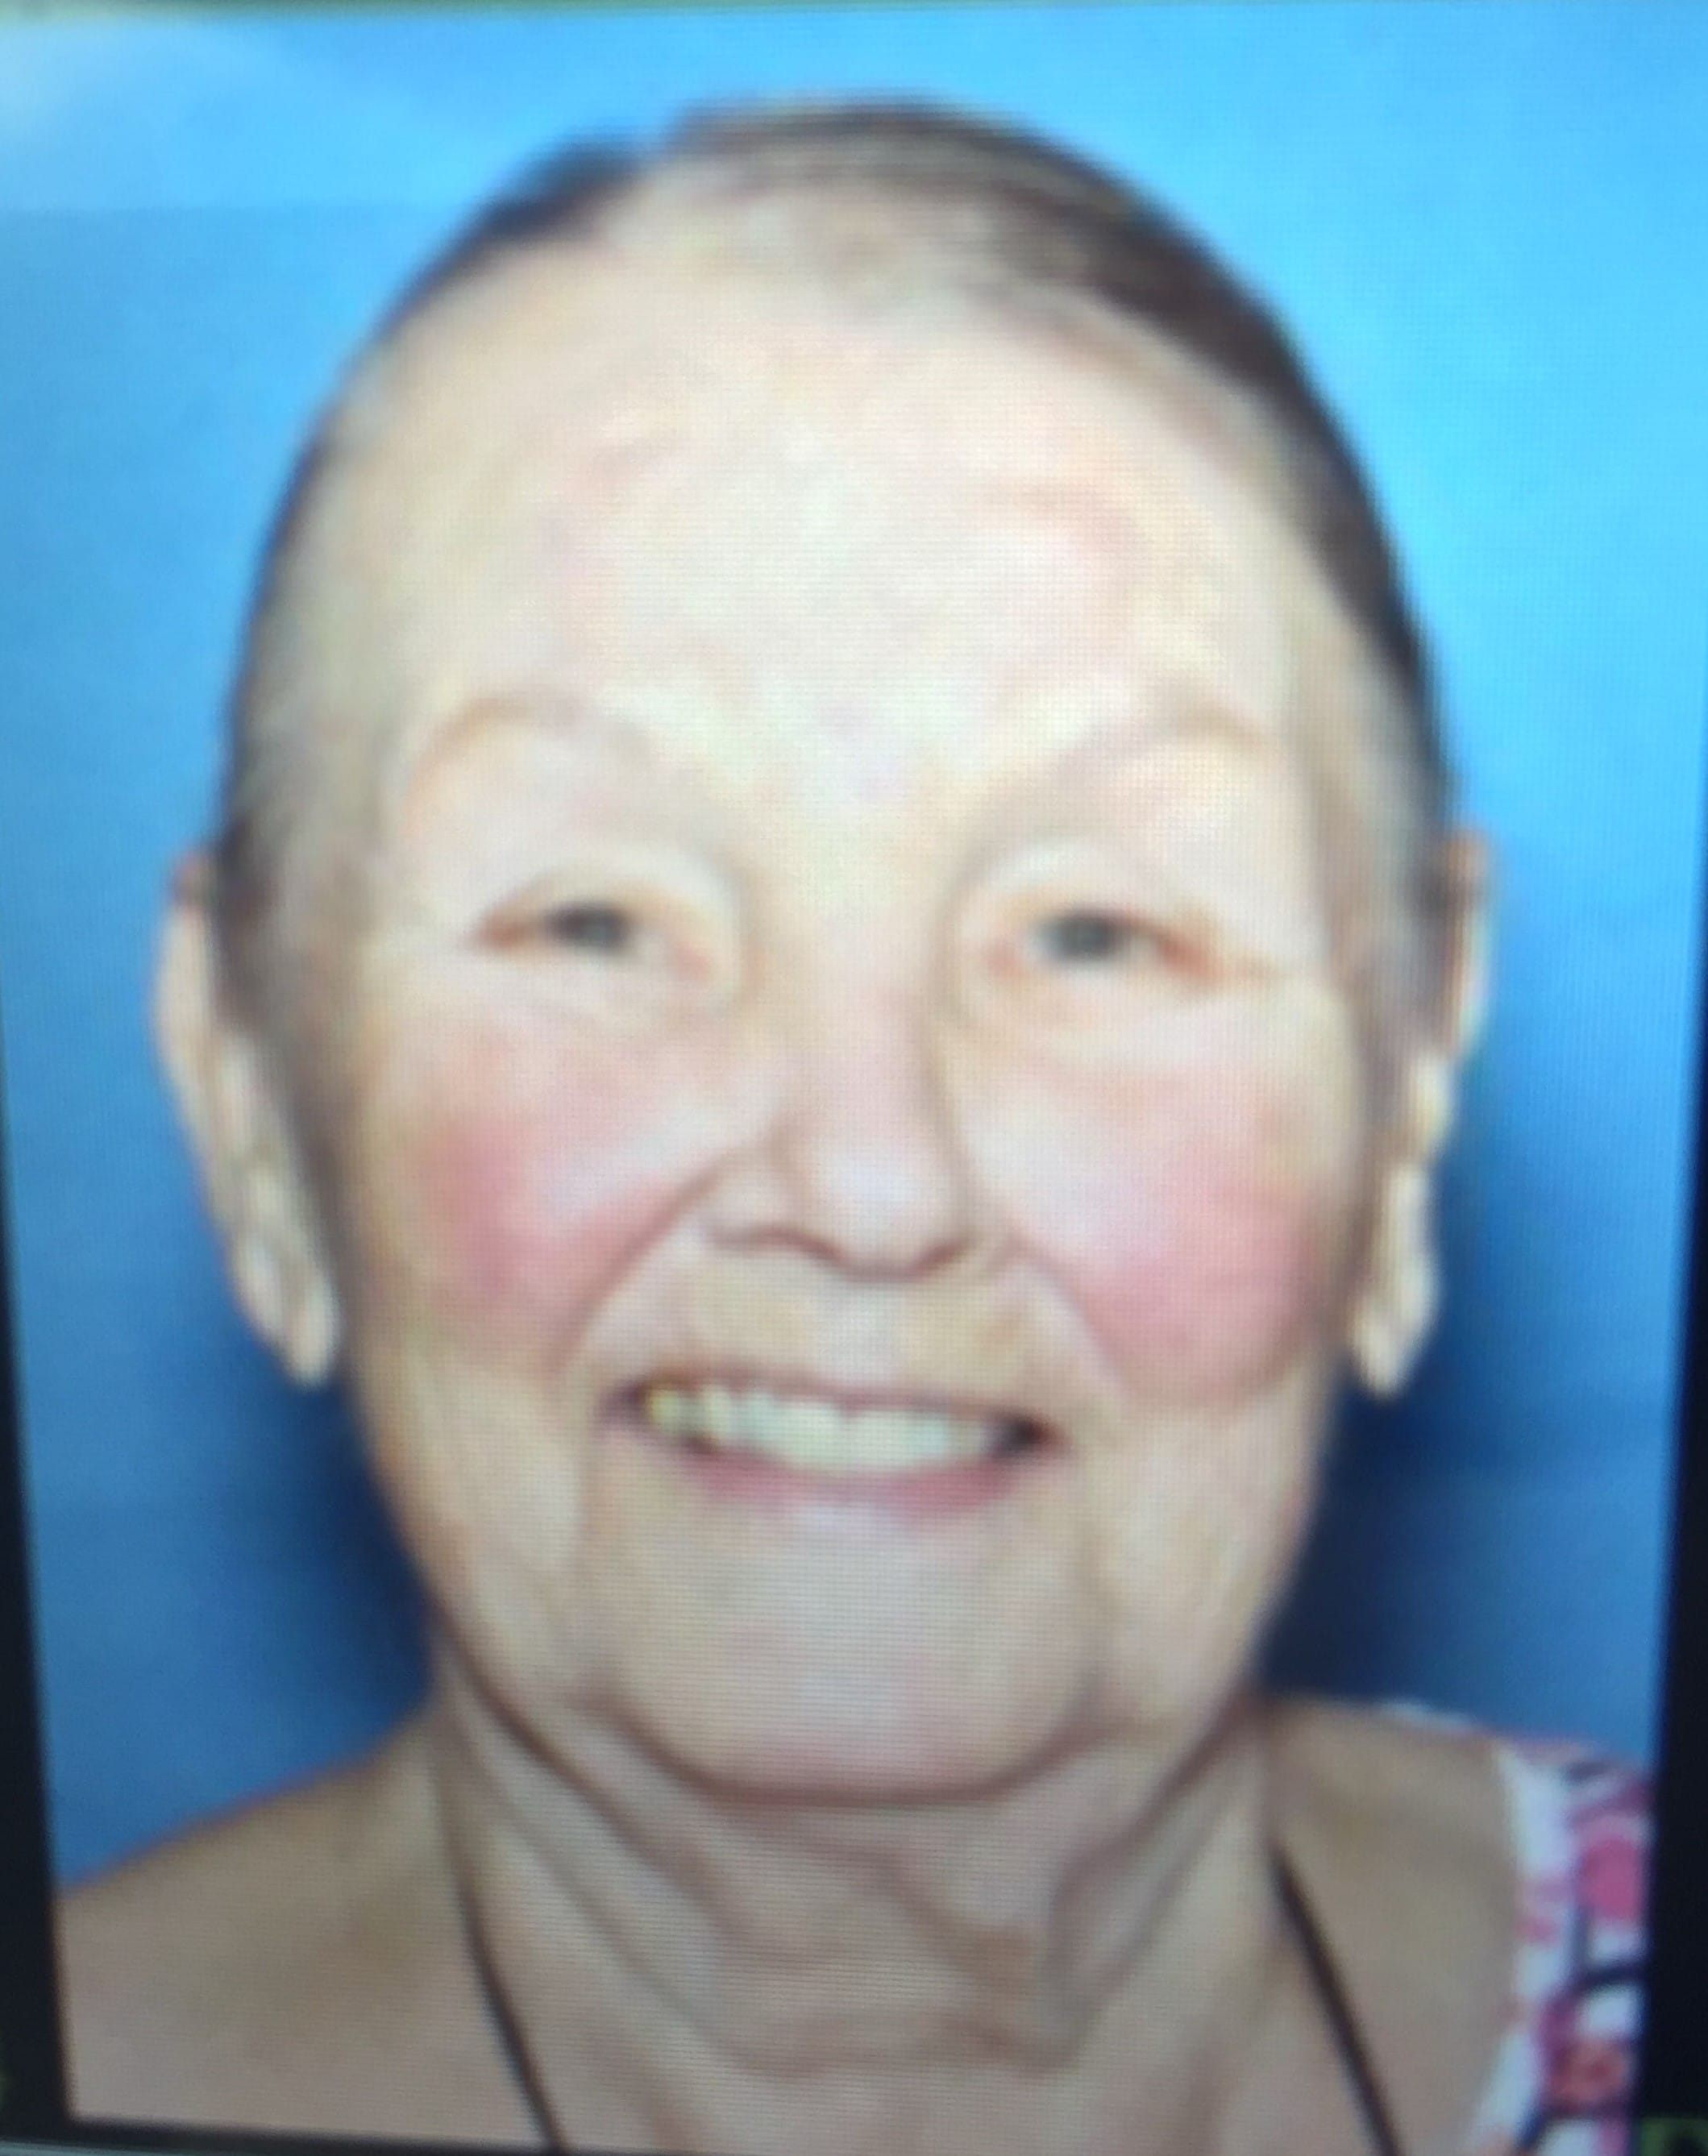 Vancouver police say Irene Holden, 75, likely walked away from her home Friday morning.